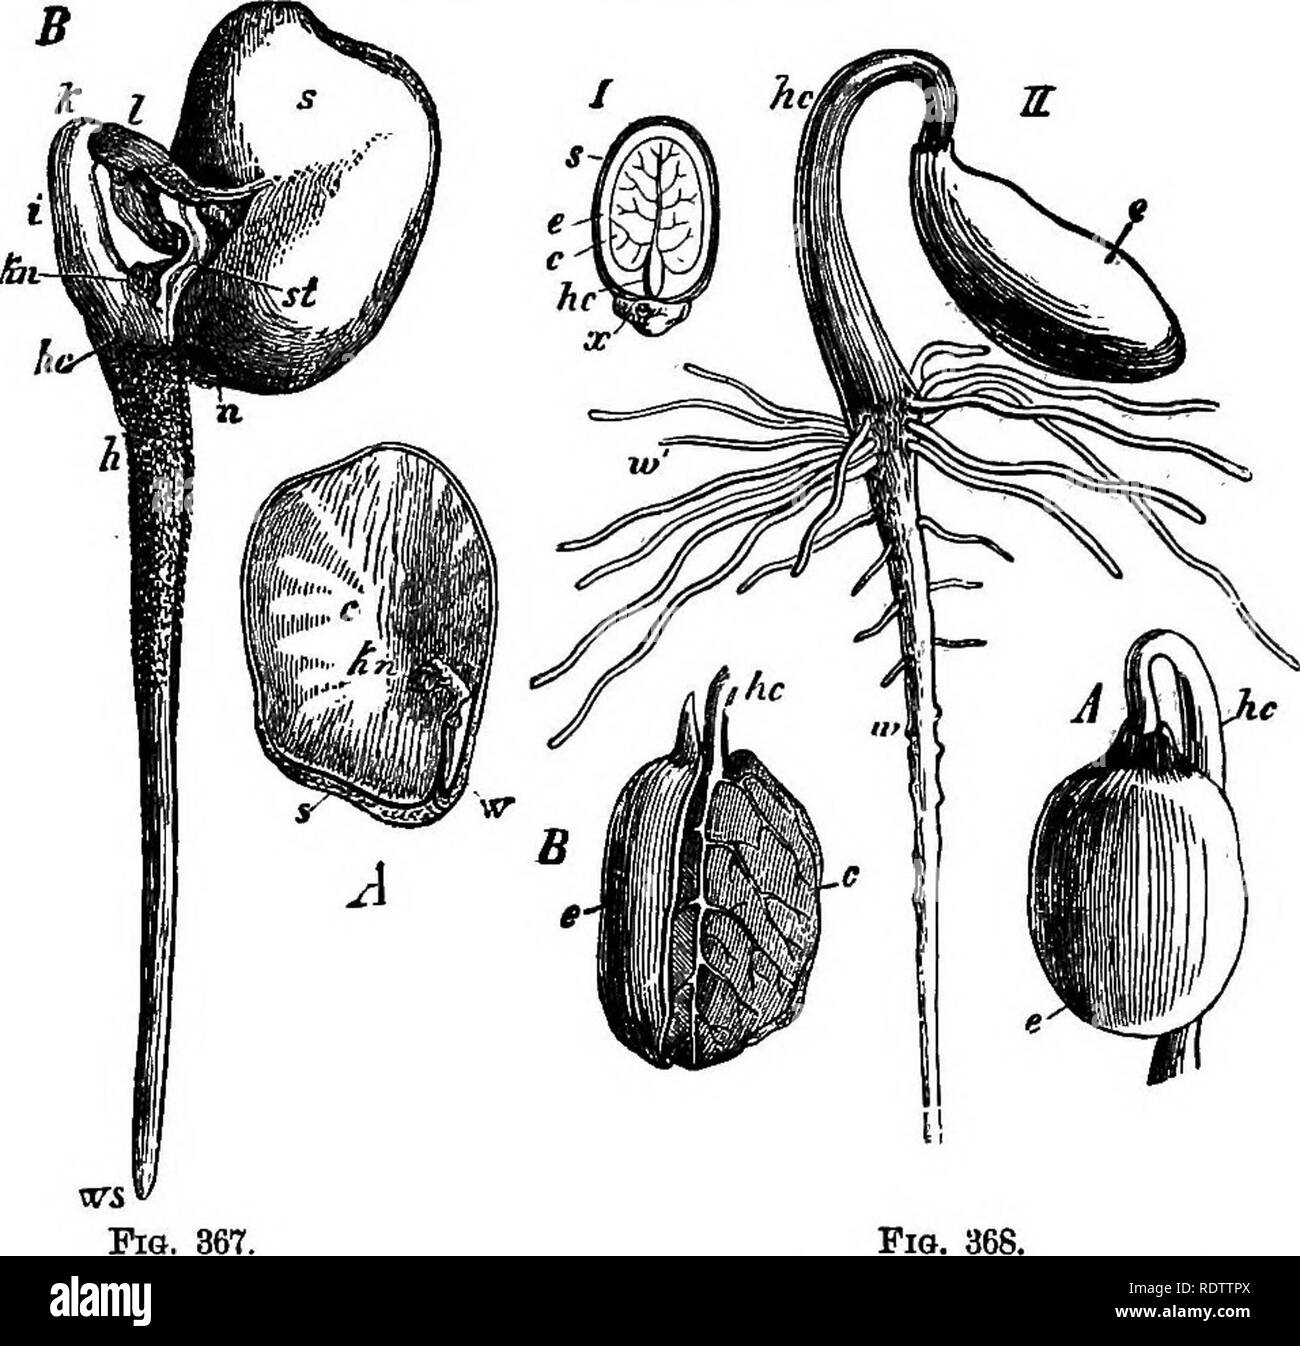 . Botany for high schools and colleges. Botany. 474 iso'tANf. part such that the veins rarely are parallel to each other, and in their anastomosing they form an irregular net-work. The germination of Dicotyledons may be illustrated by a couple of examples. In tlie seed of tbe Windsor Bean (Fig. 367) the embryo entirely fills up the seed-cavity, the endosperm having all been nb- Fiea. 887-8.âGermination op Dicotyledons.. Fio. 36S. Fig. 367.â Yiciafdba. ^, seed with one cotyledon removed; c, remaining cotyle- don ; hn, the plumule â , w, the radicle ; s, seed-coat. S, germinating B^ed ; s, seed- Stock Photo